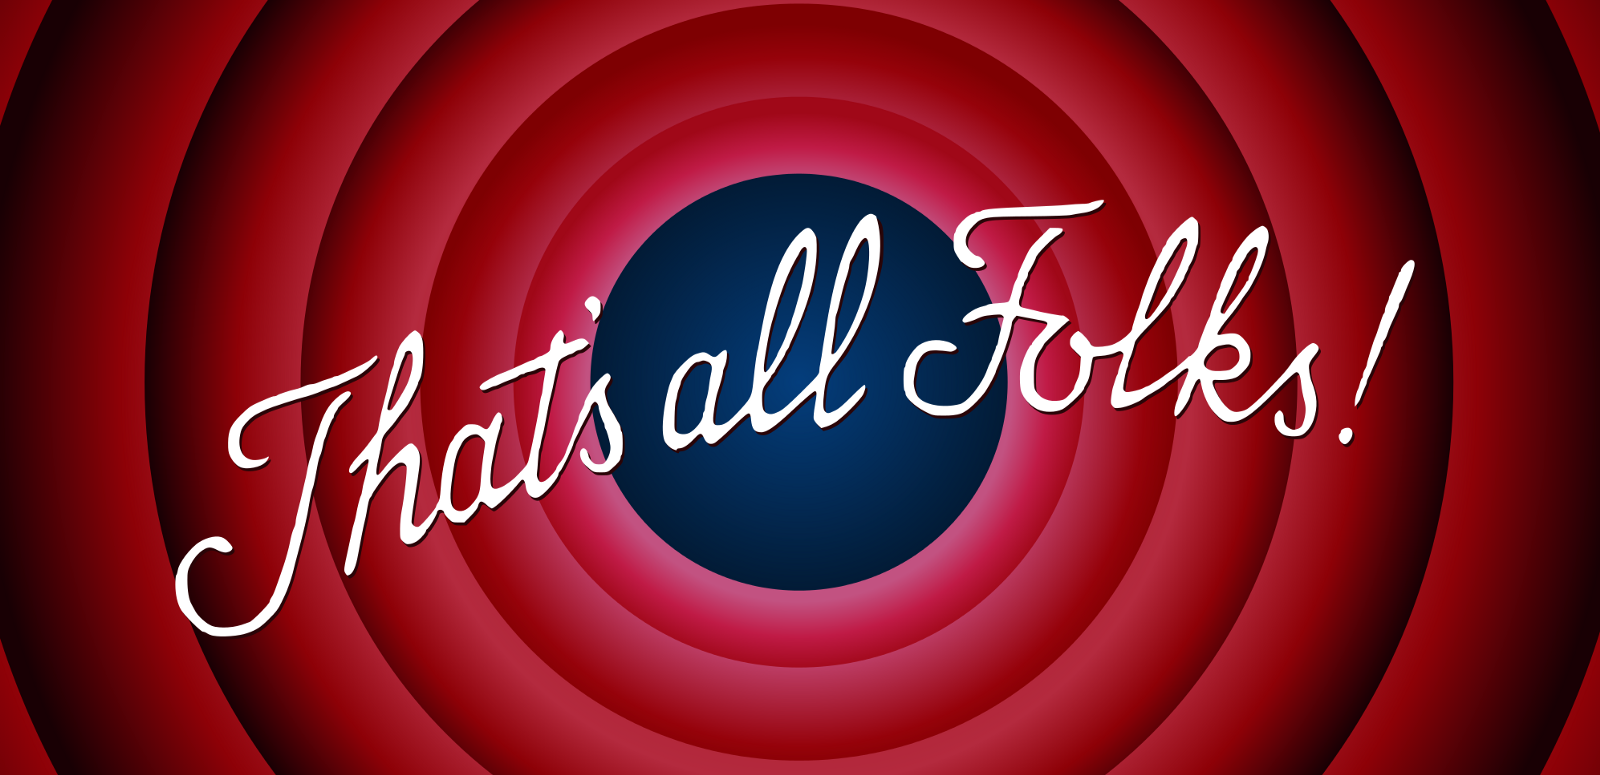 That’s all folks!